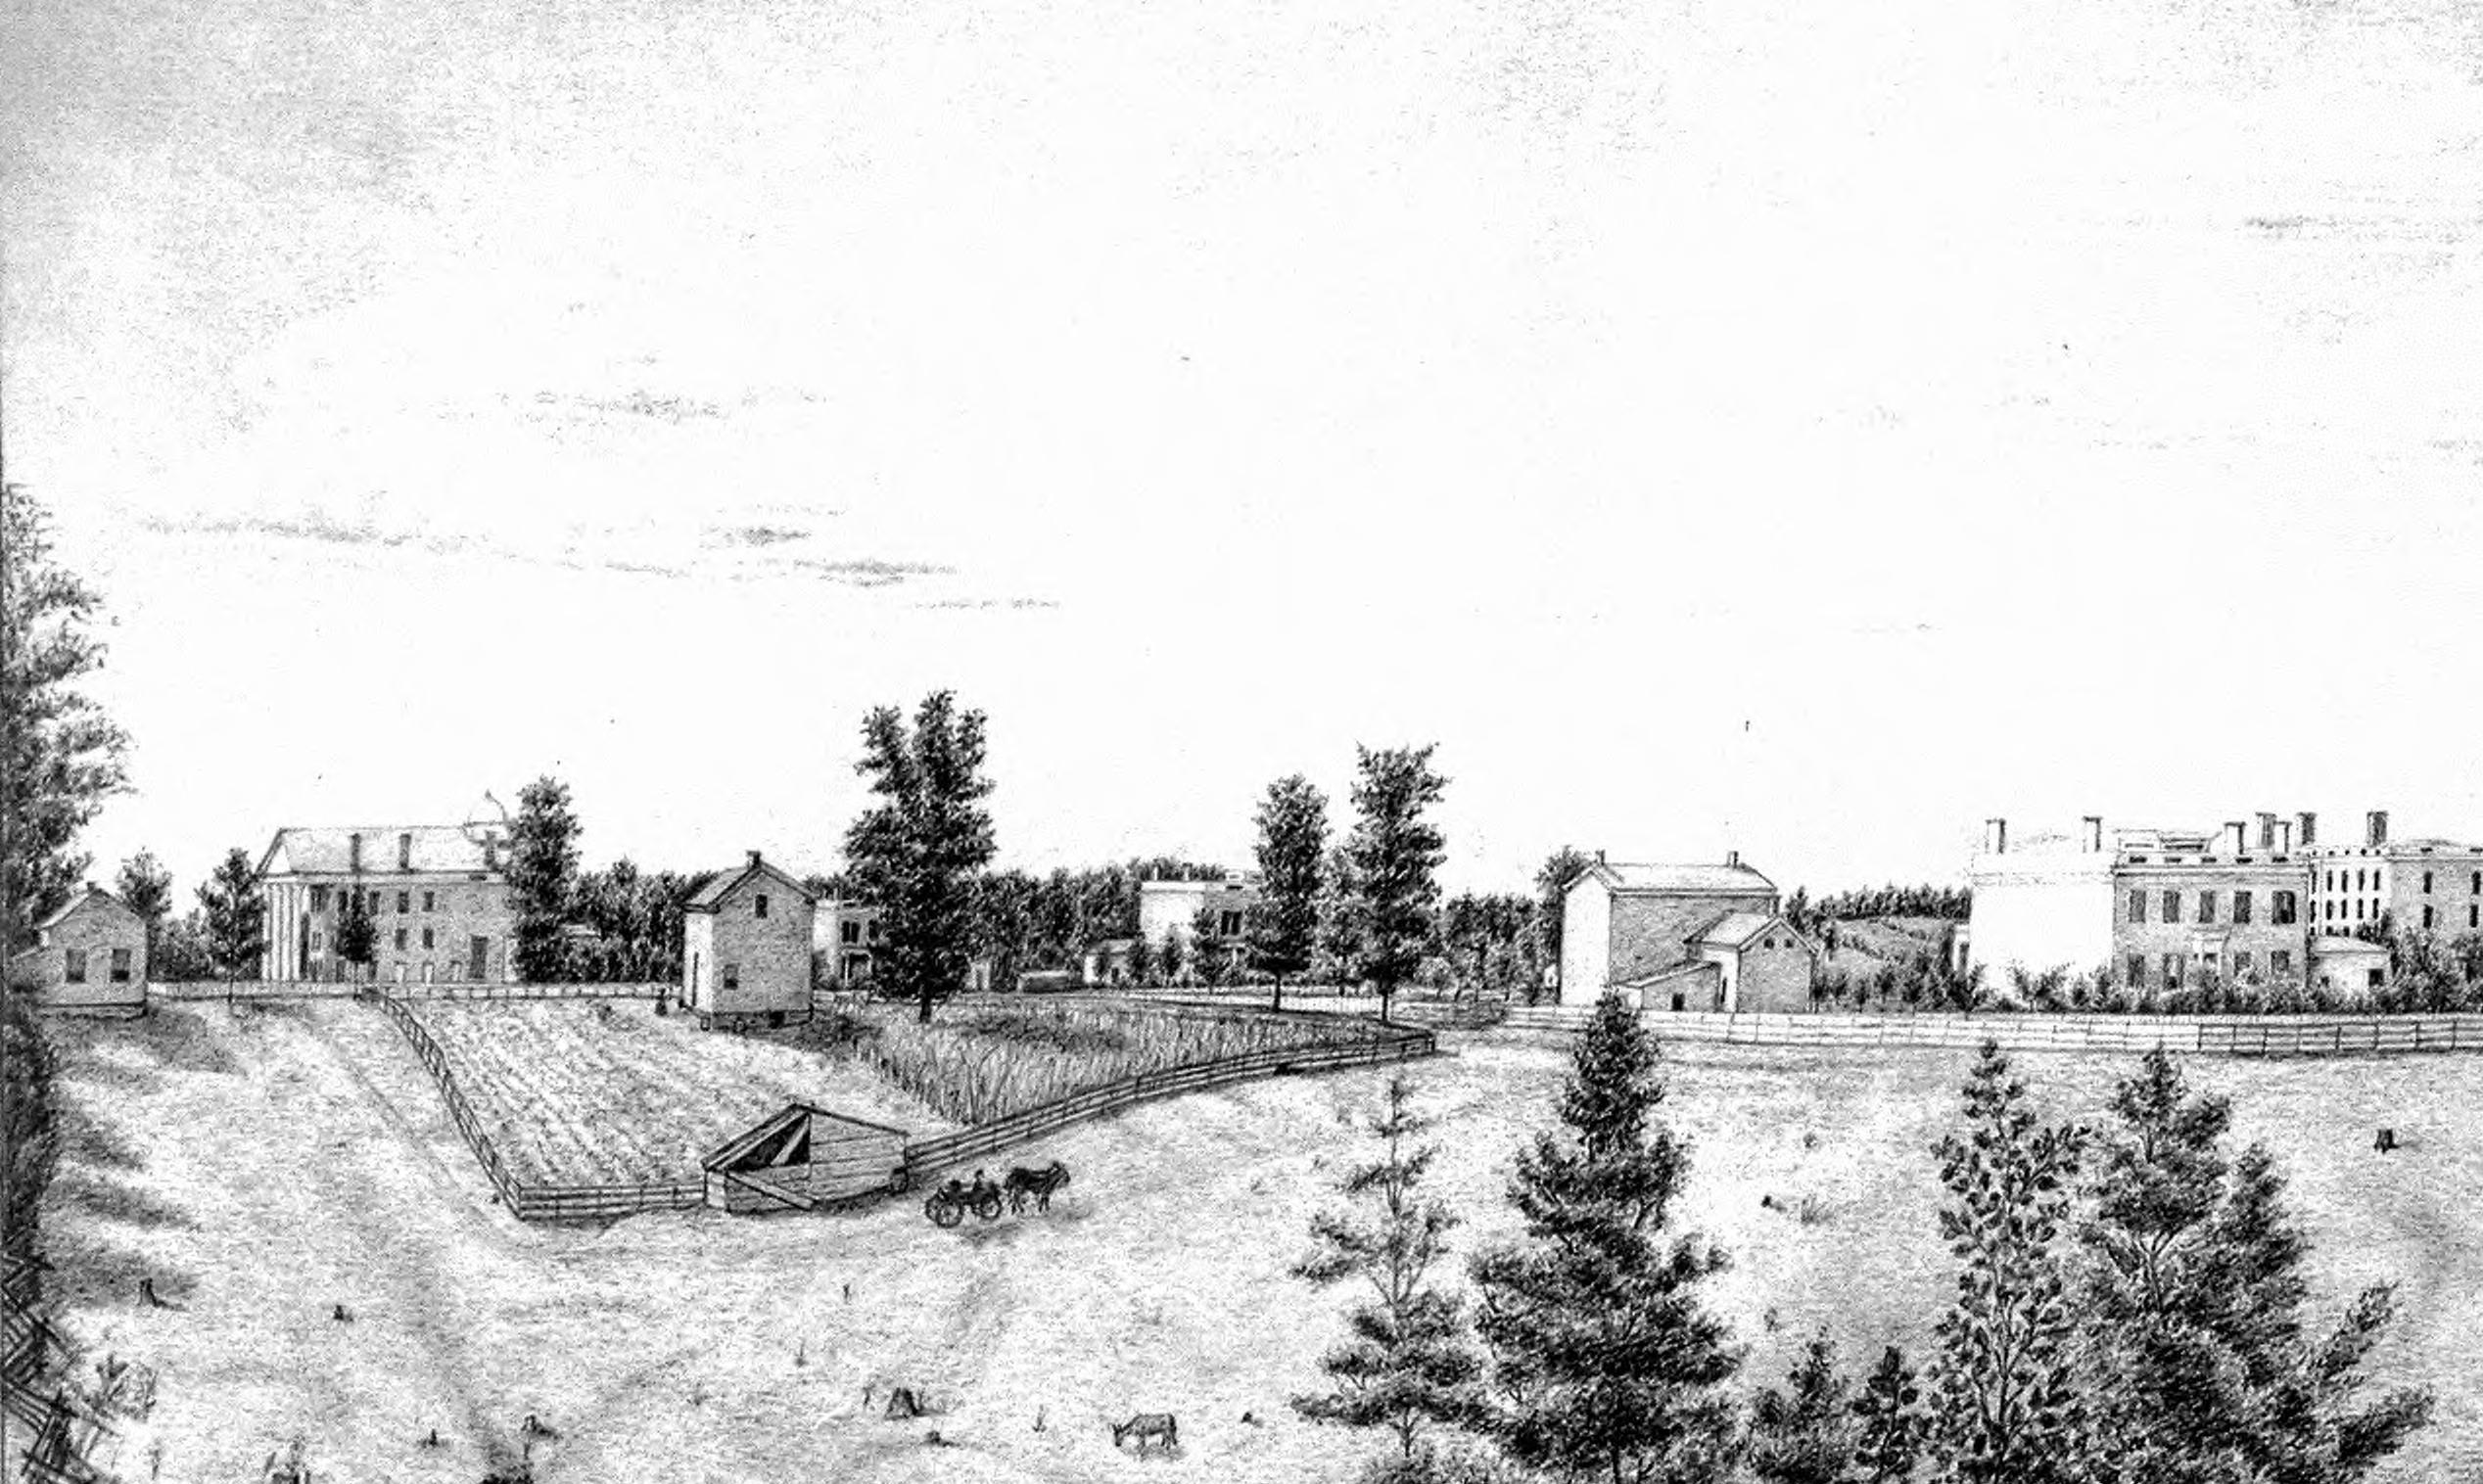 1855 sketch by Adeline B. Mead showing medical school and professor's house that became the first hospital